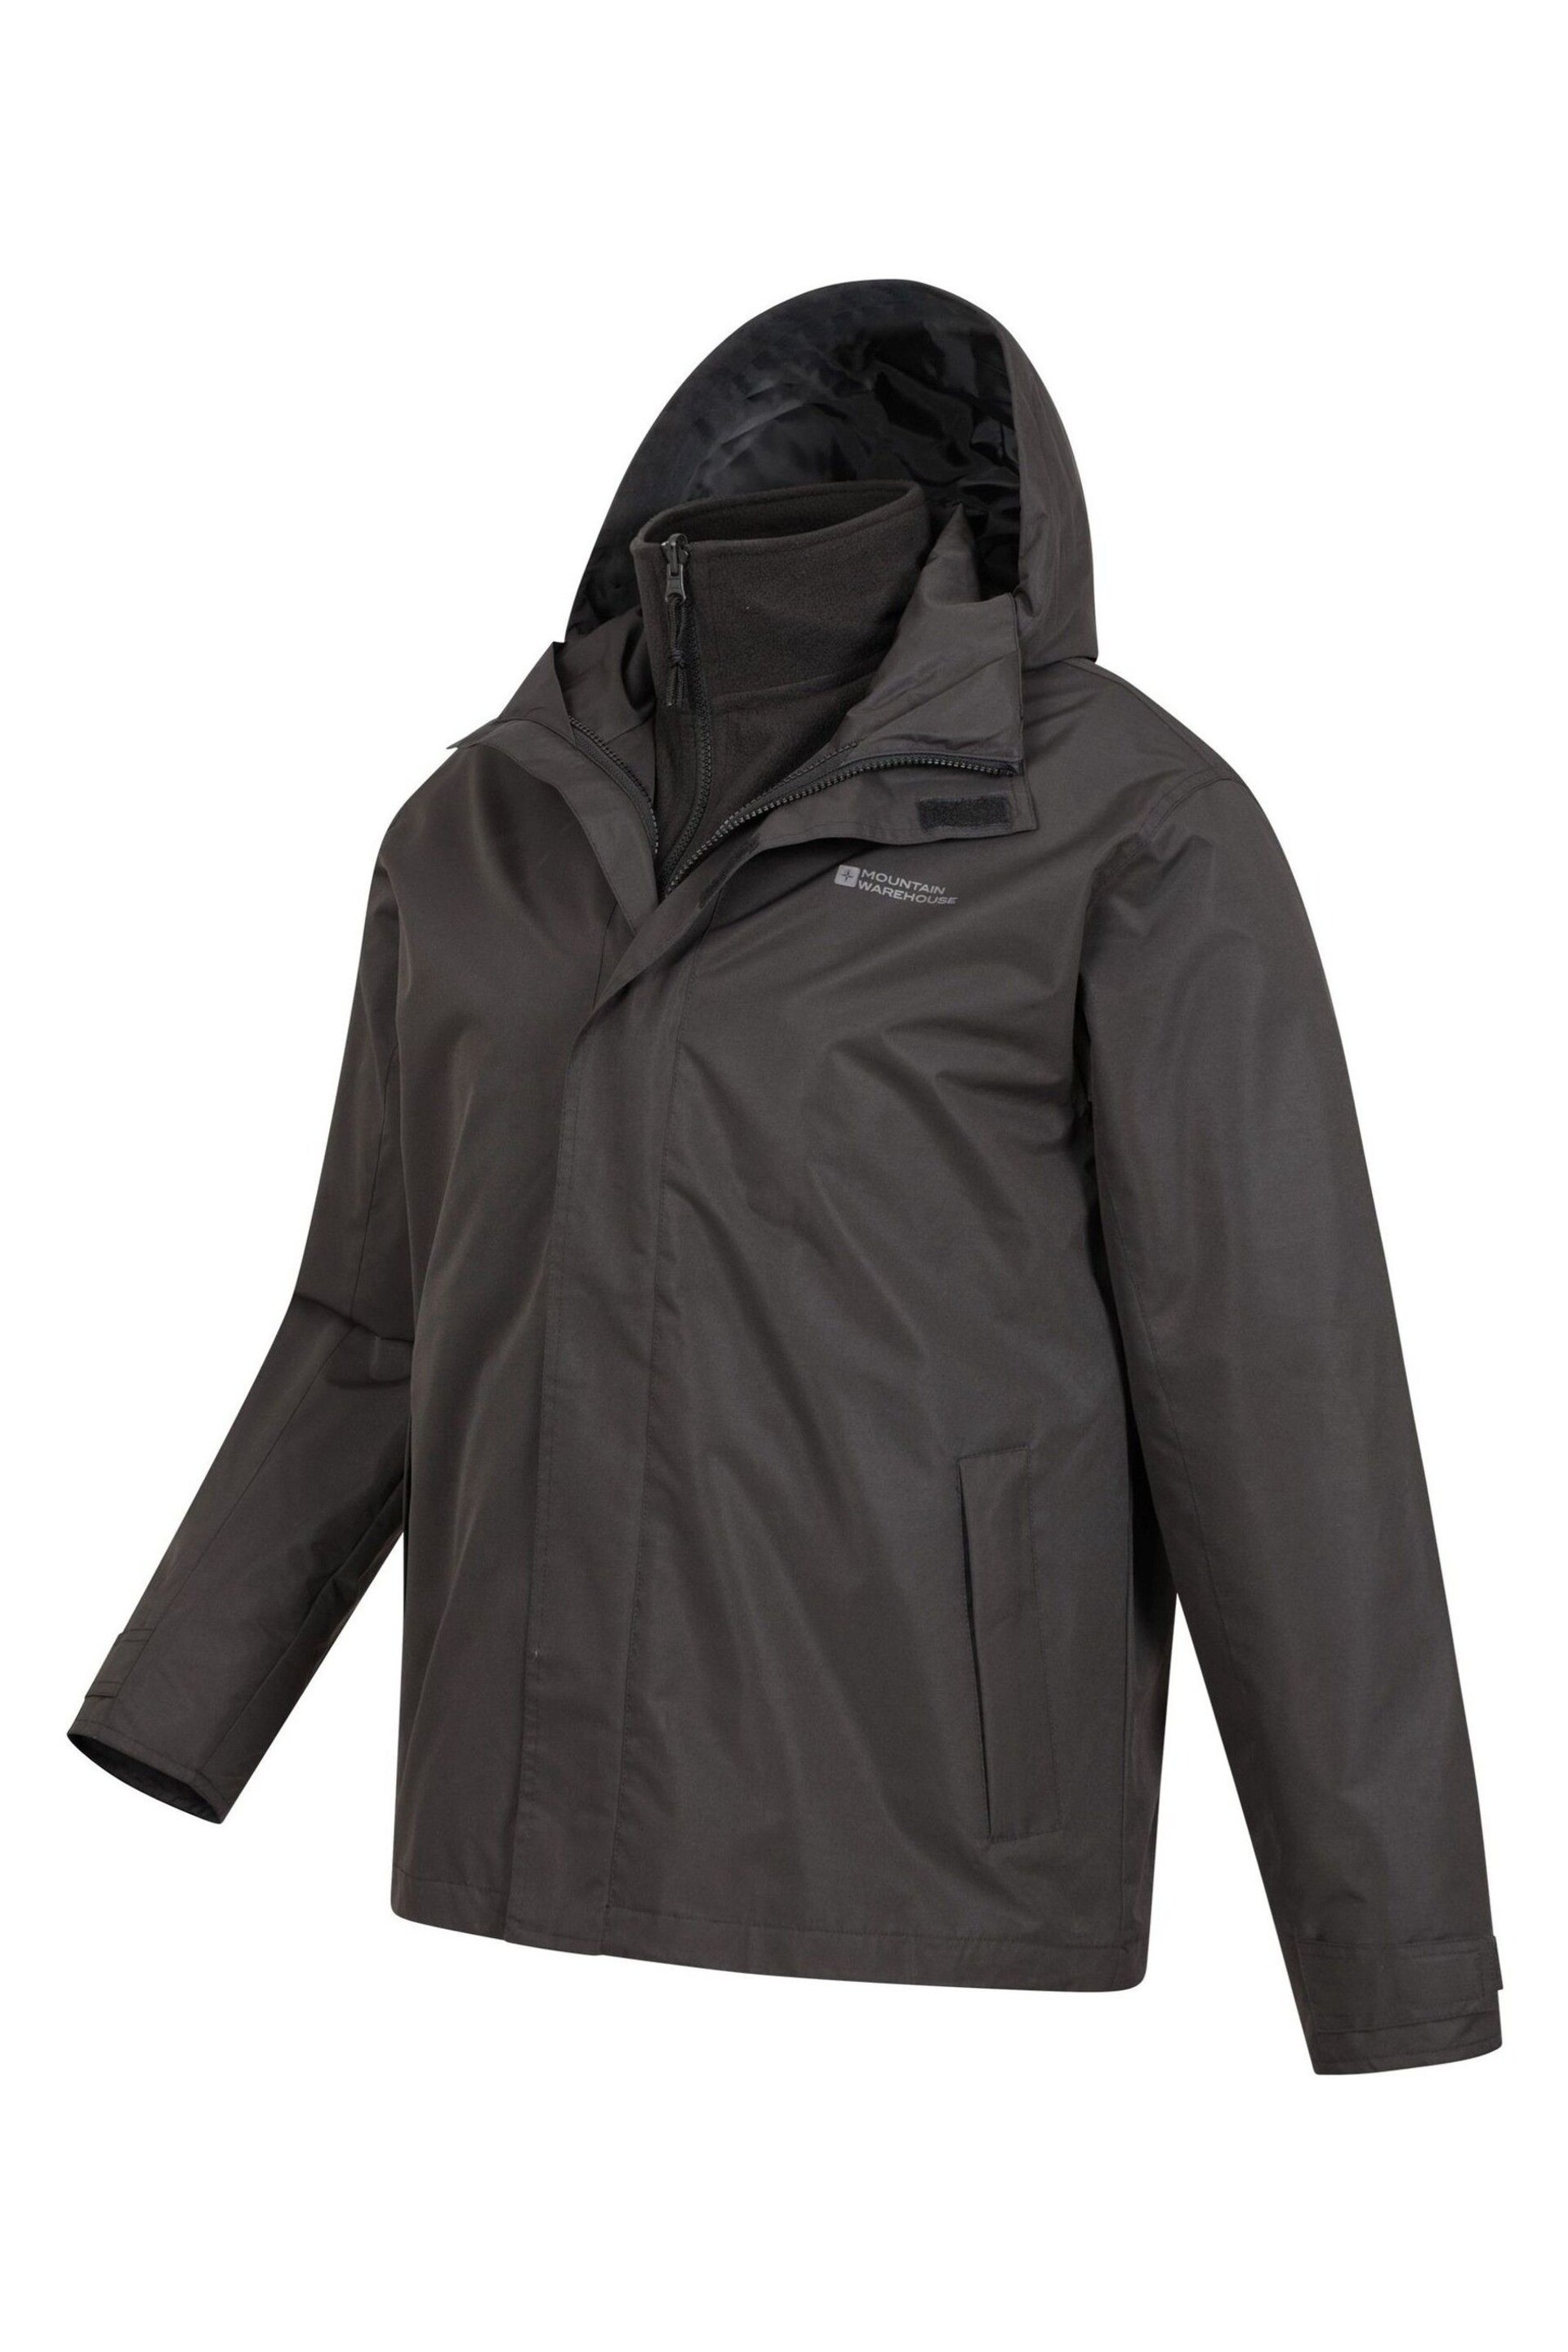 Mountain Warehouse Black Fell Mens 3 in 1 Water Resistant Jacket - Image 2 of 5